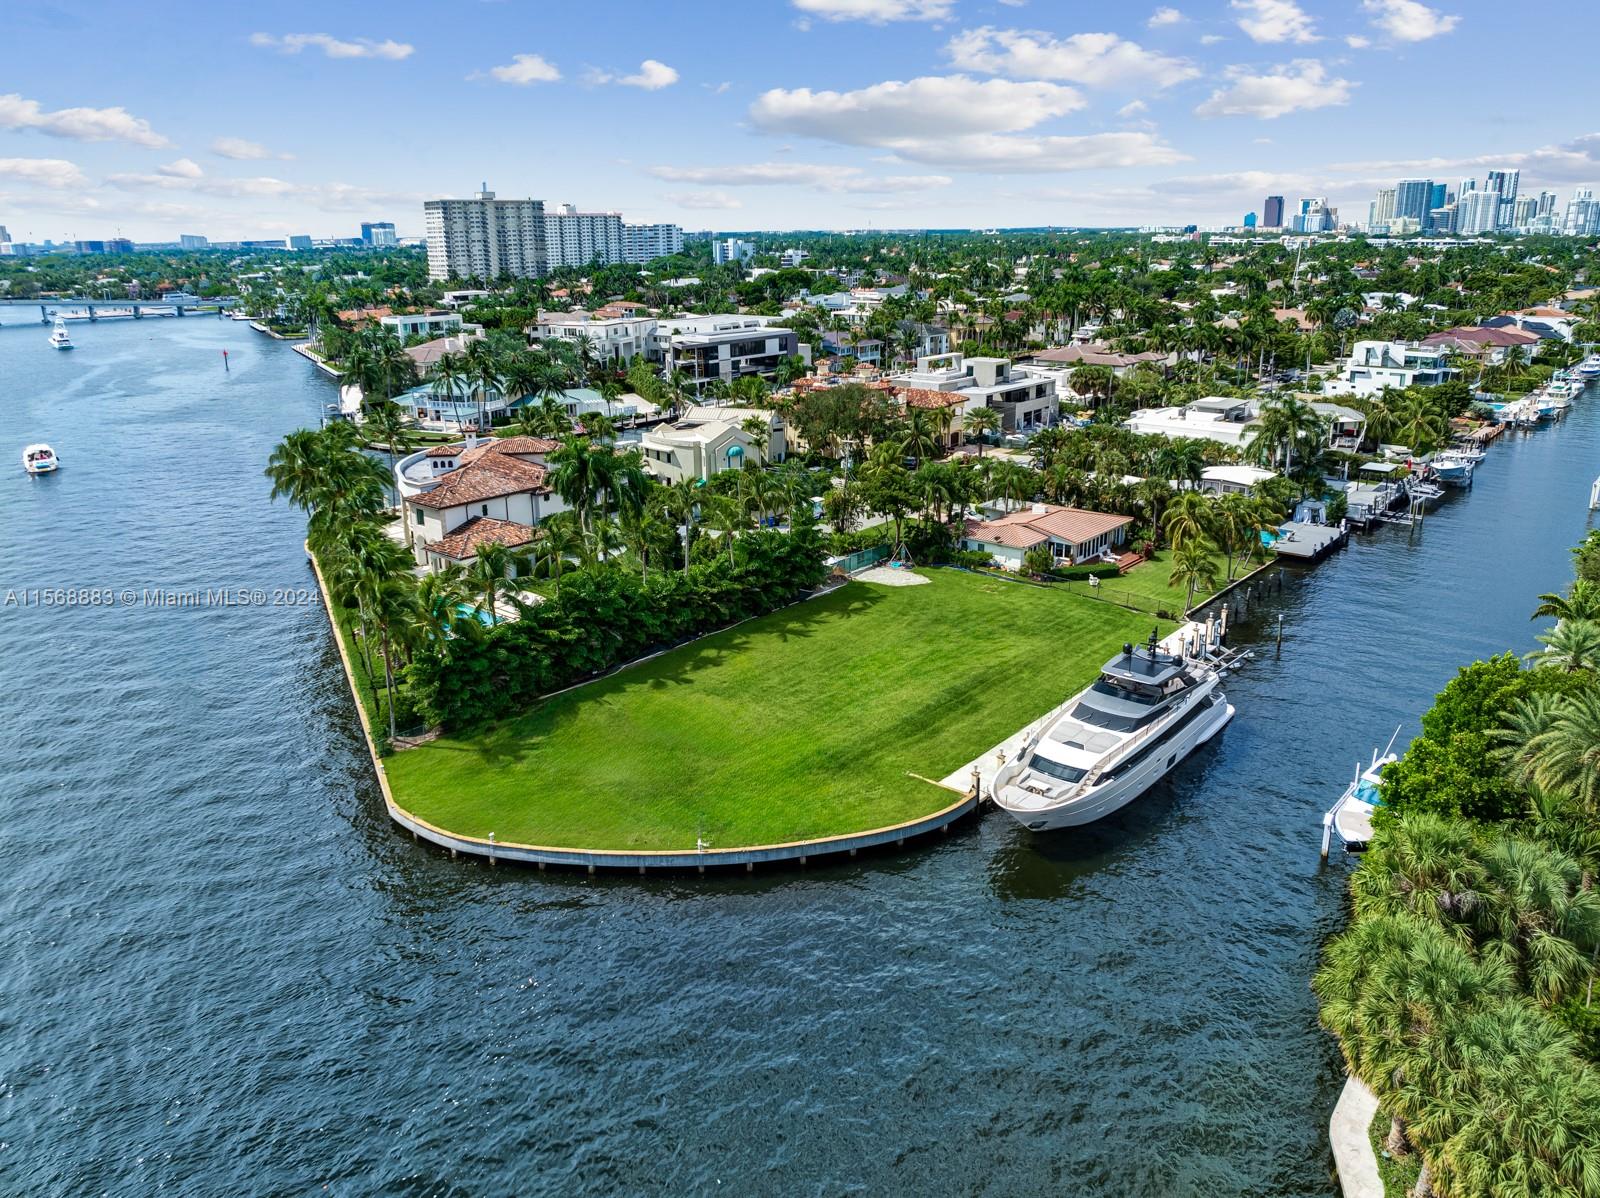 Rare Intracoastal point lot! Incredible building opportunity in the highly desirable Seven Isles community of Fort Lauderdale. This 19,676 Square Foot lot on a point offers stunning direct Intracoastal views and Superyacht dockage. Ability to build a 10,000+ Square Foot dream home with 283 feet of water frontage and easy access to the ocean. Private & exclusive neighborhood with guard house & 24-hour security patrol. Close proximity to the Beach, Las Olas, Dining, Shopping, Downtown, and the Airport. Your paradise awaits you! **For dockage reference, yacht featured in photos is 96 feet.